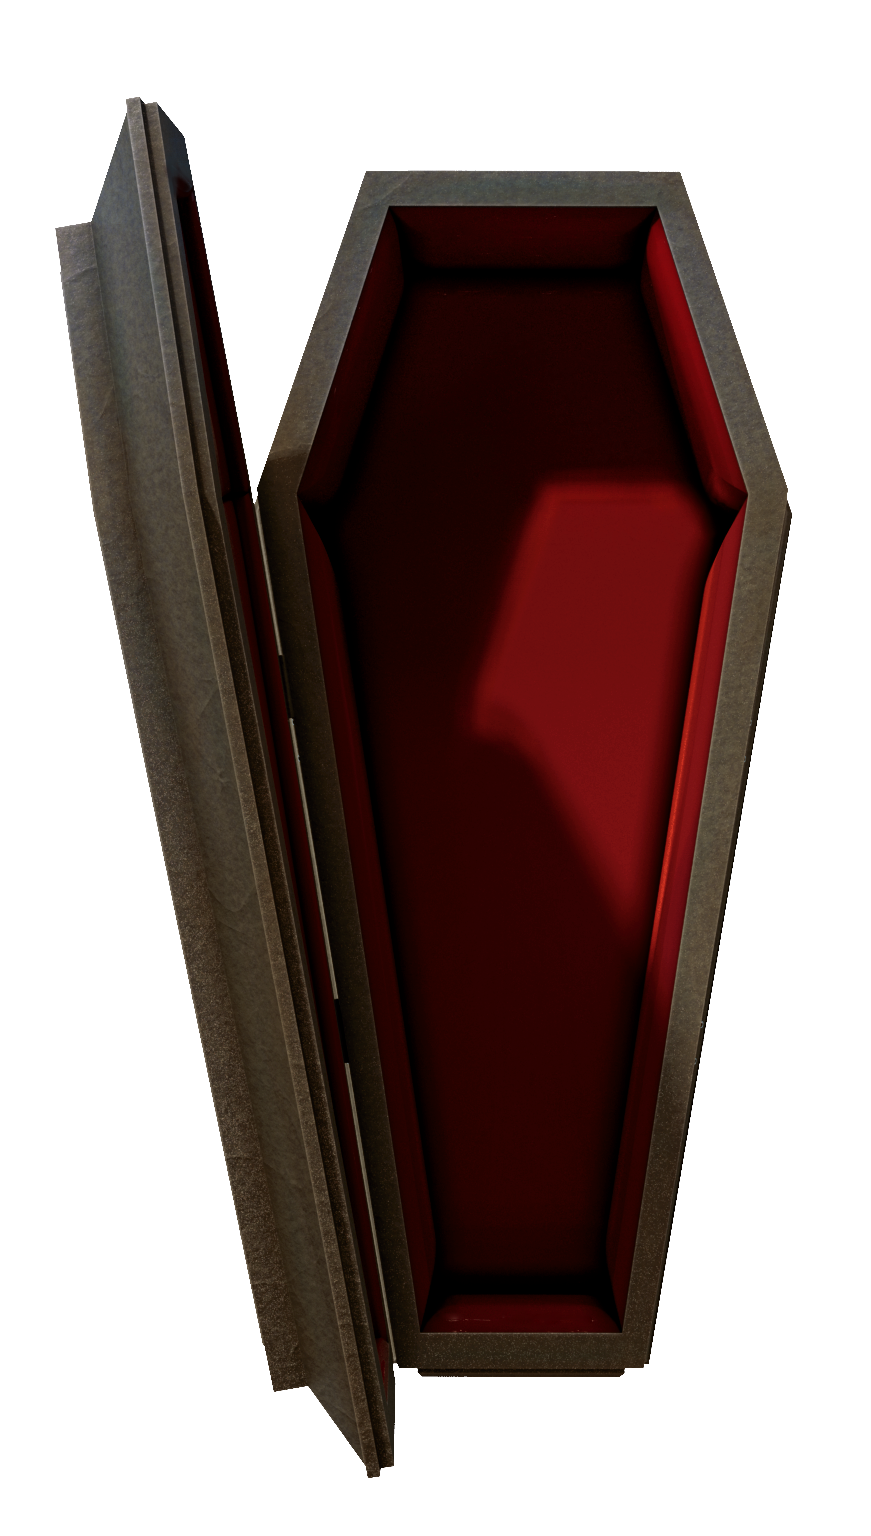 80_extra_coffin_top_open_transparent_halloween.png thumbnail